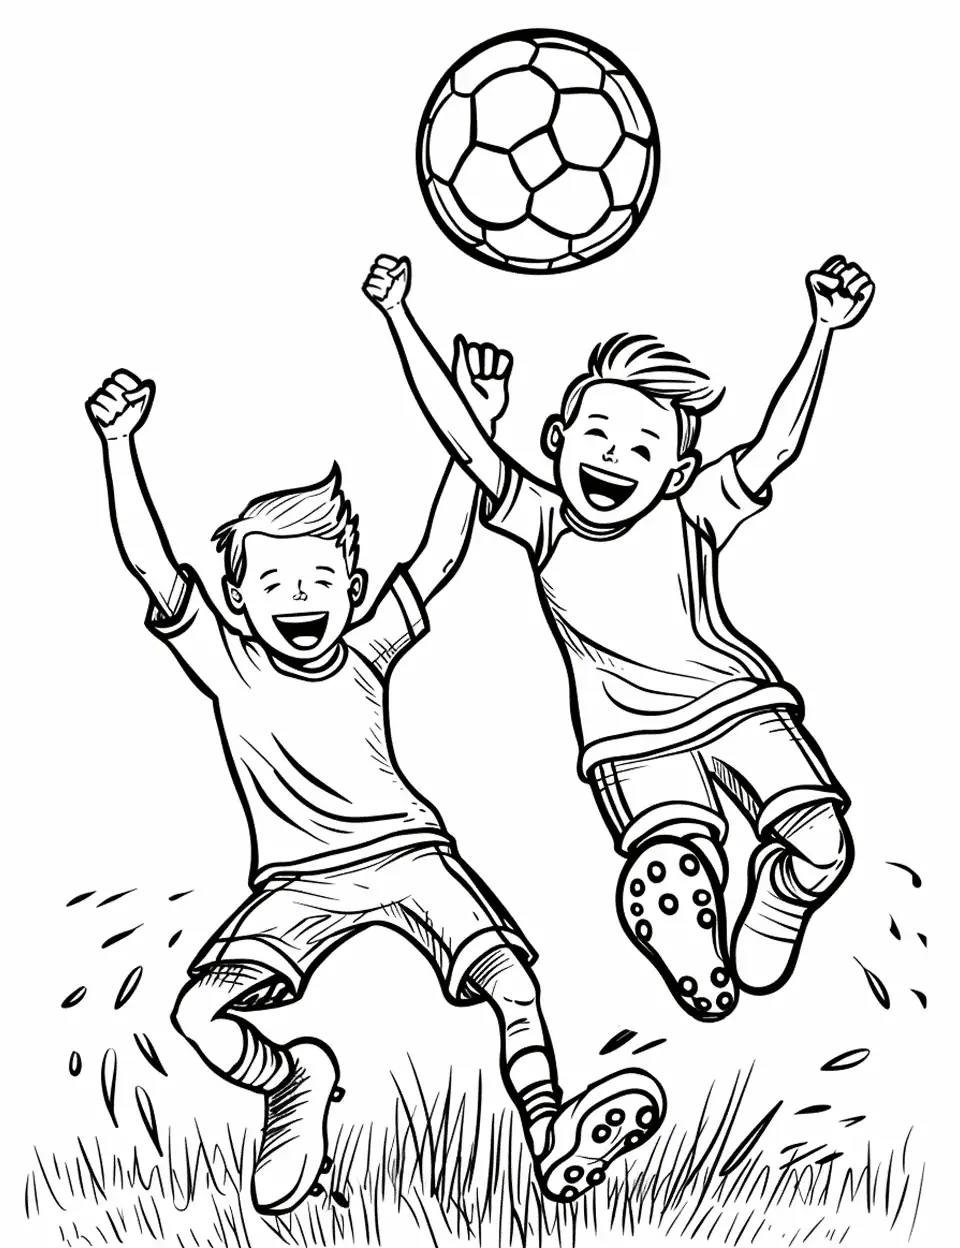 Fun Soccer Practice Coloring Page - A group of kids laughing and having fun while practicing soccer drills.